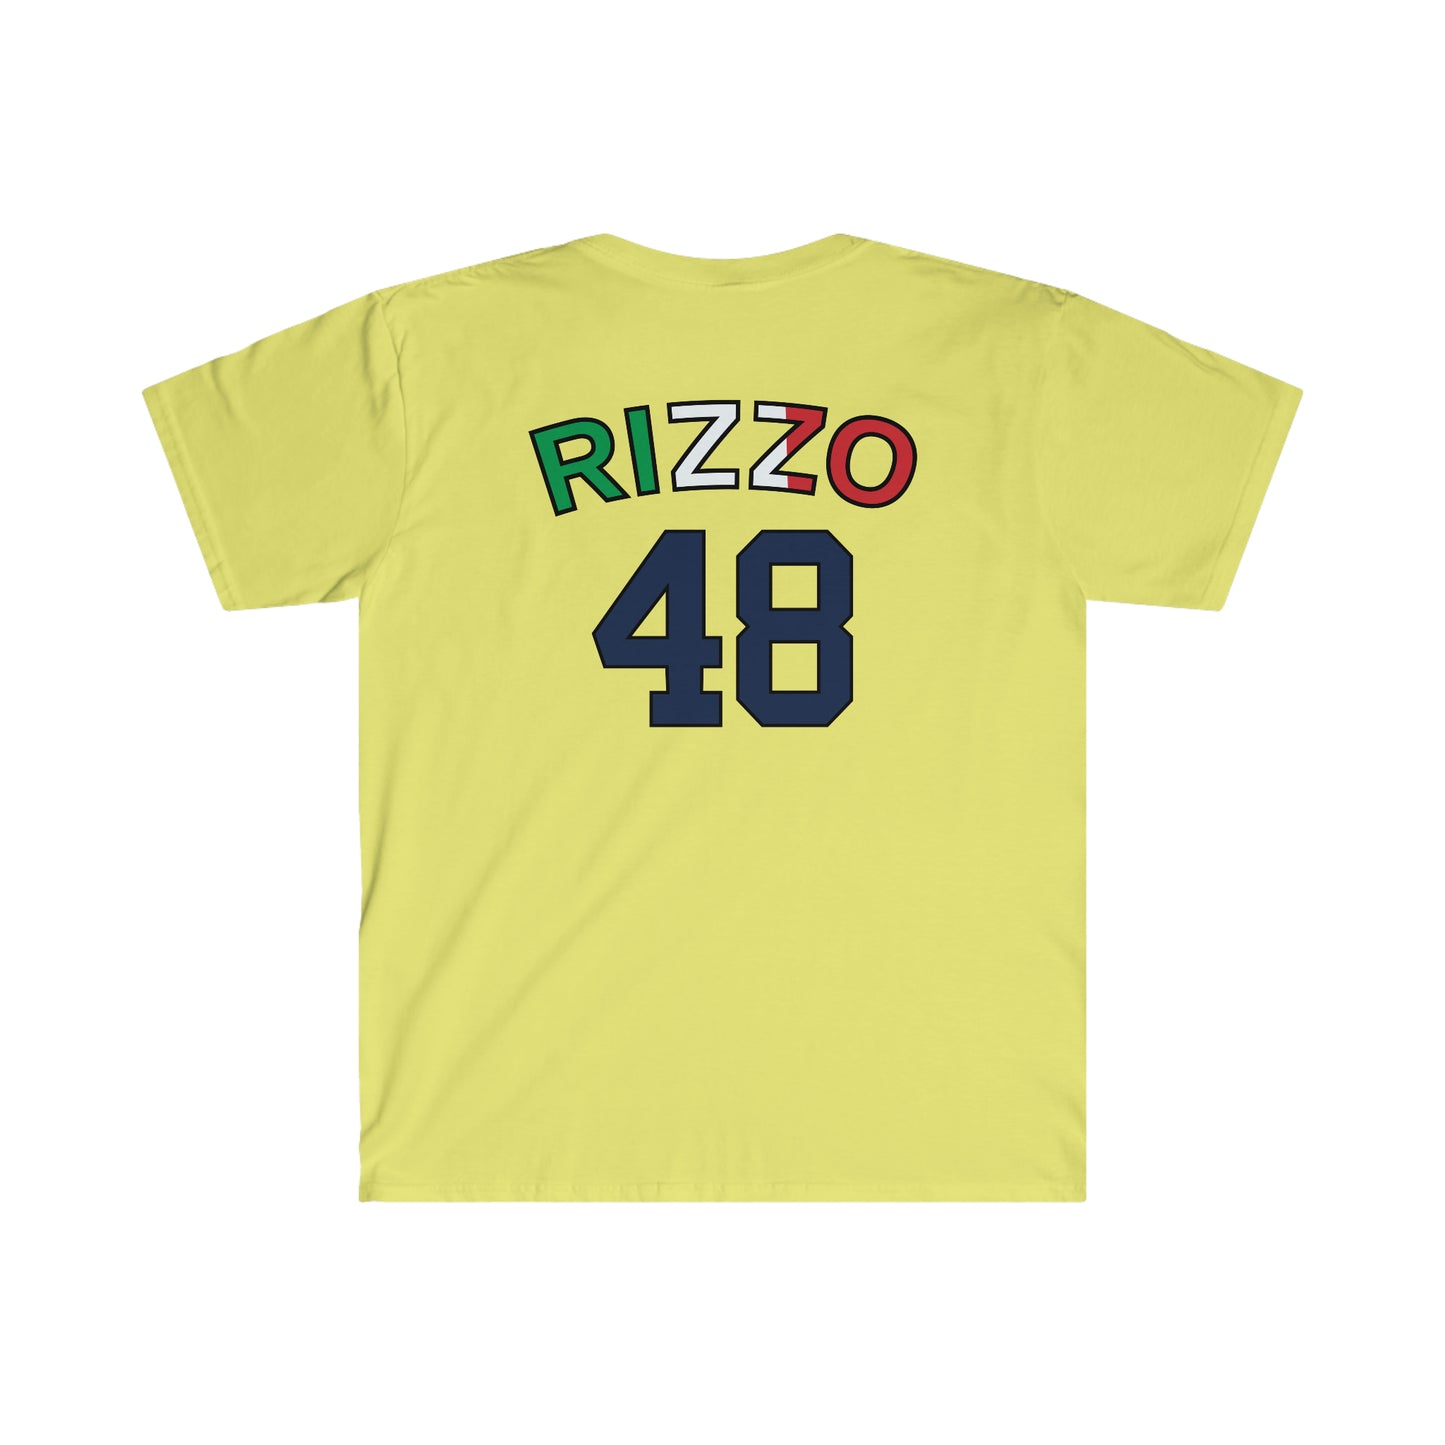 Anthony Rizzo Hitter T-Shirts for Sale